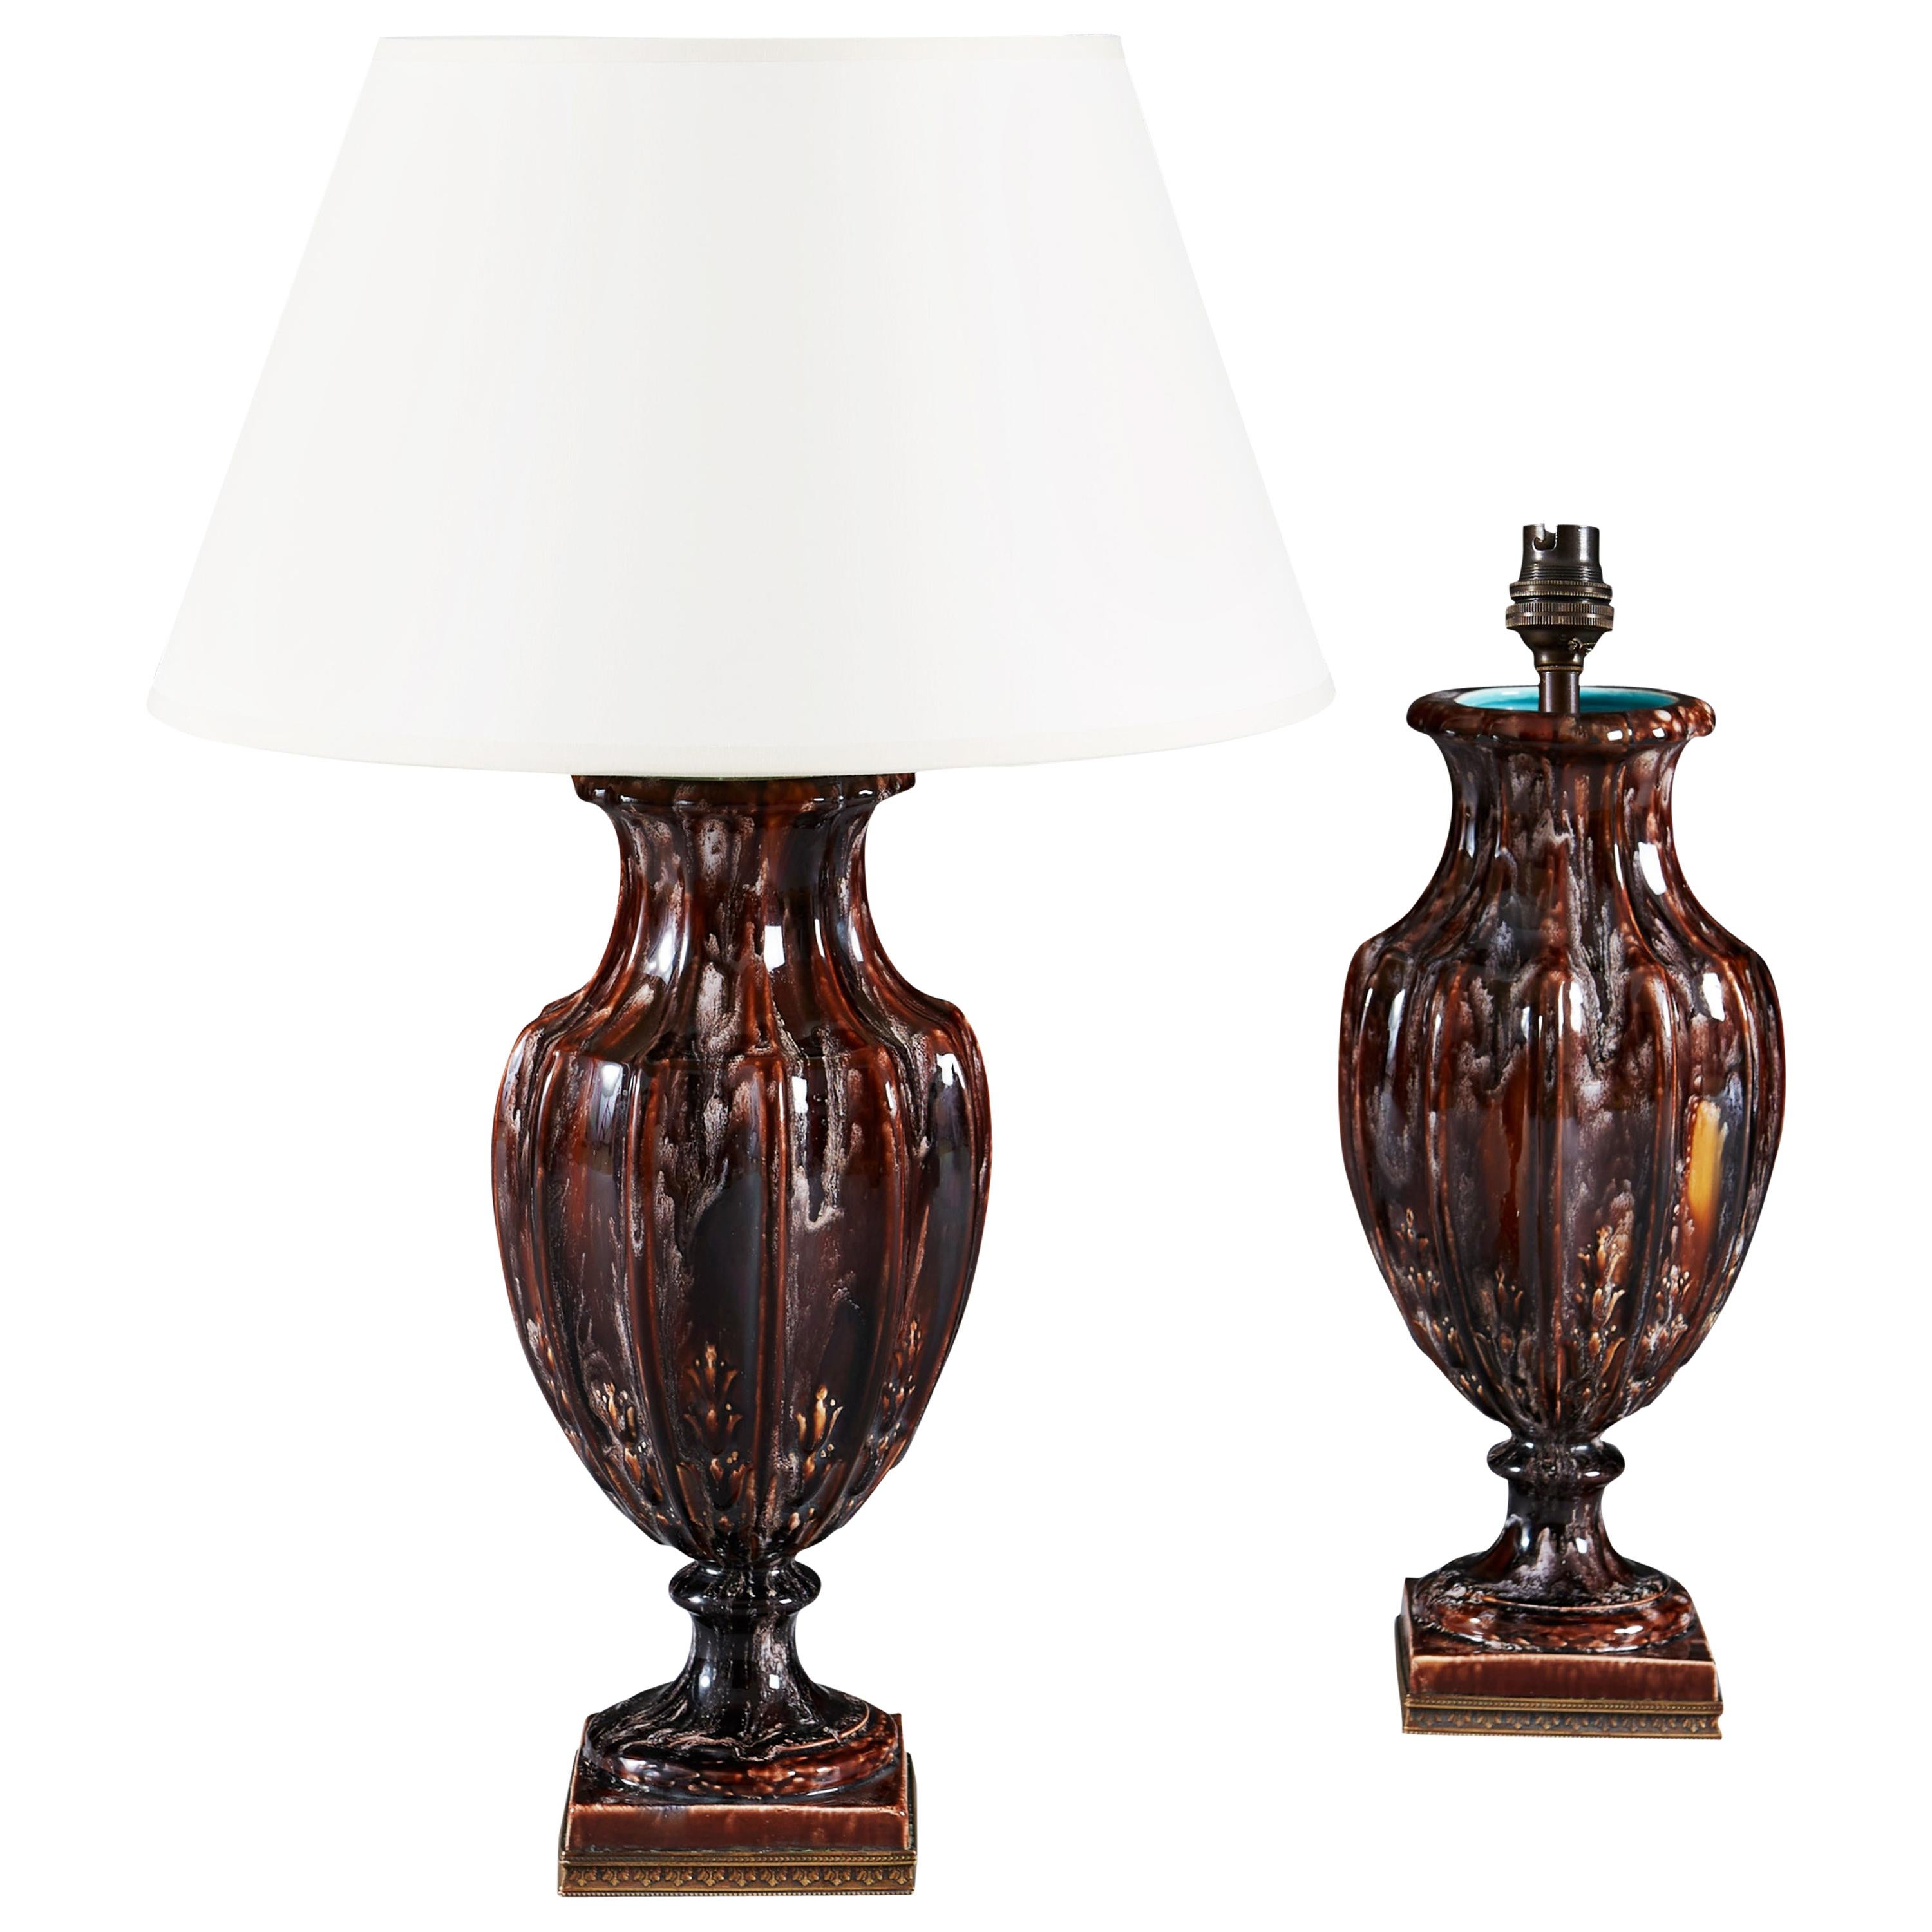 Pair of Brown Drip Glaze Urn Vases with Brass Mounts, Now as Table Lamps